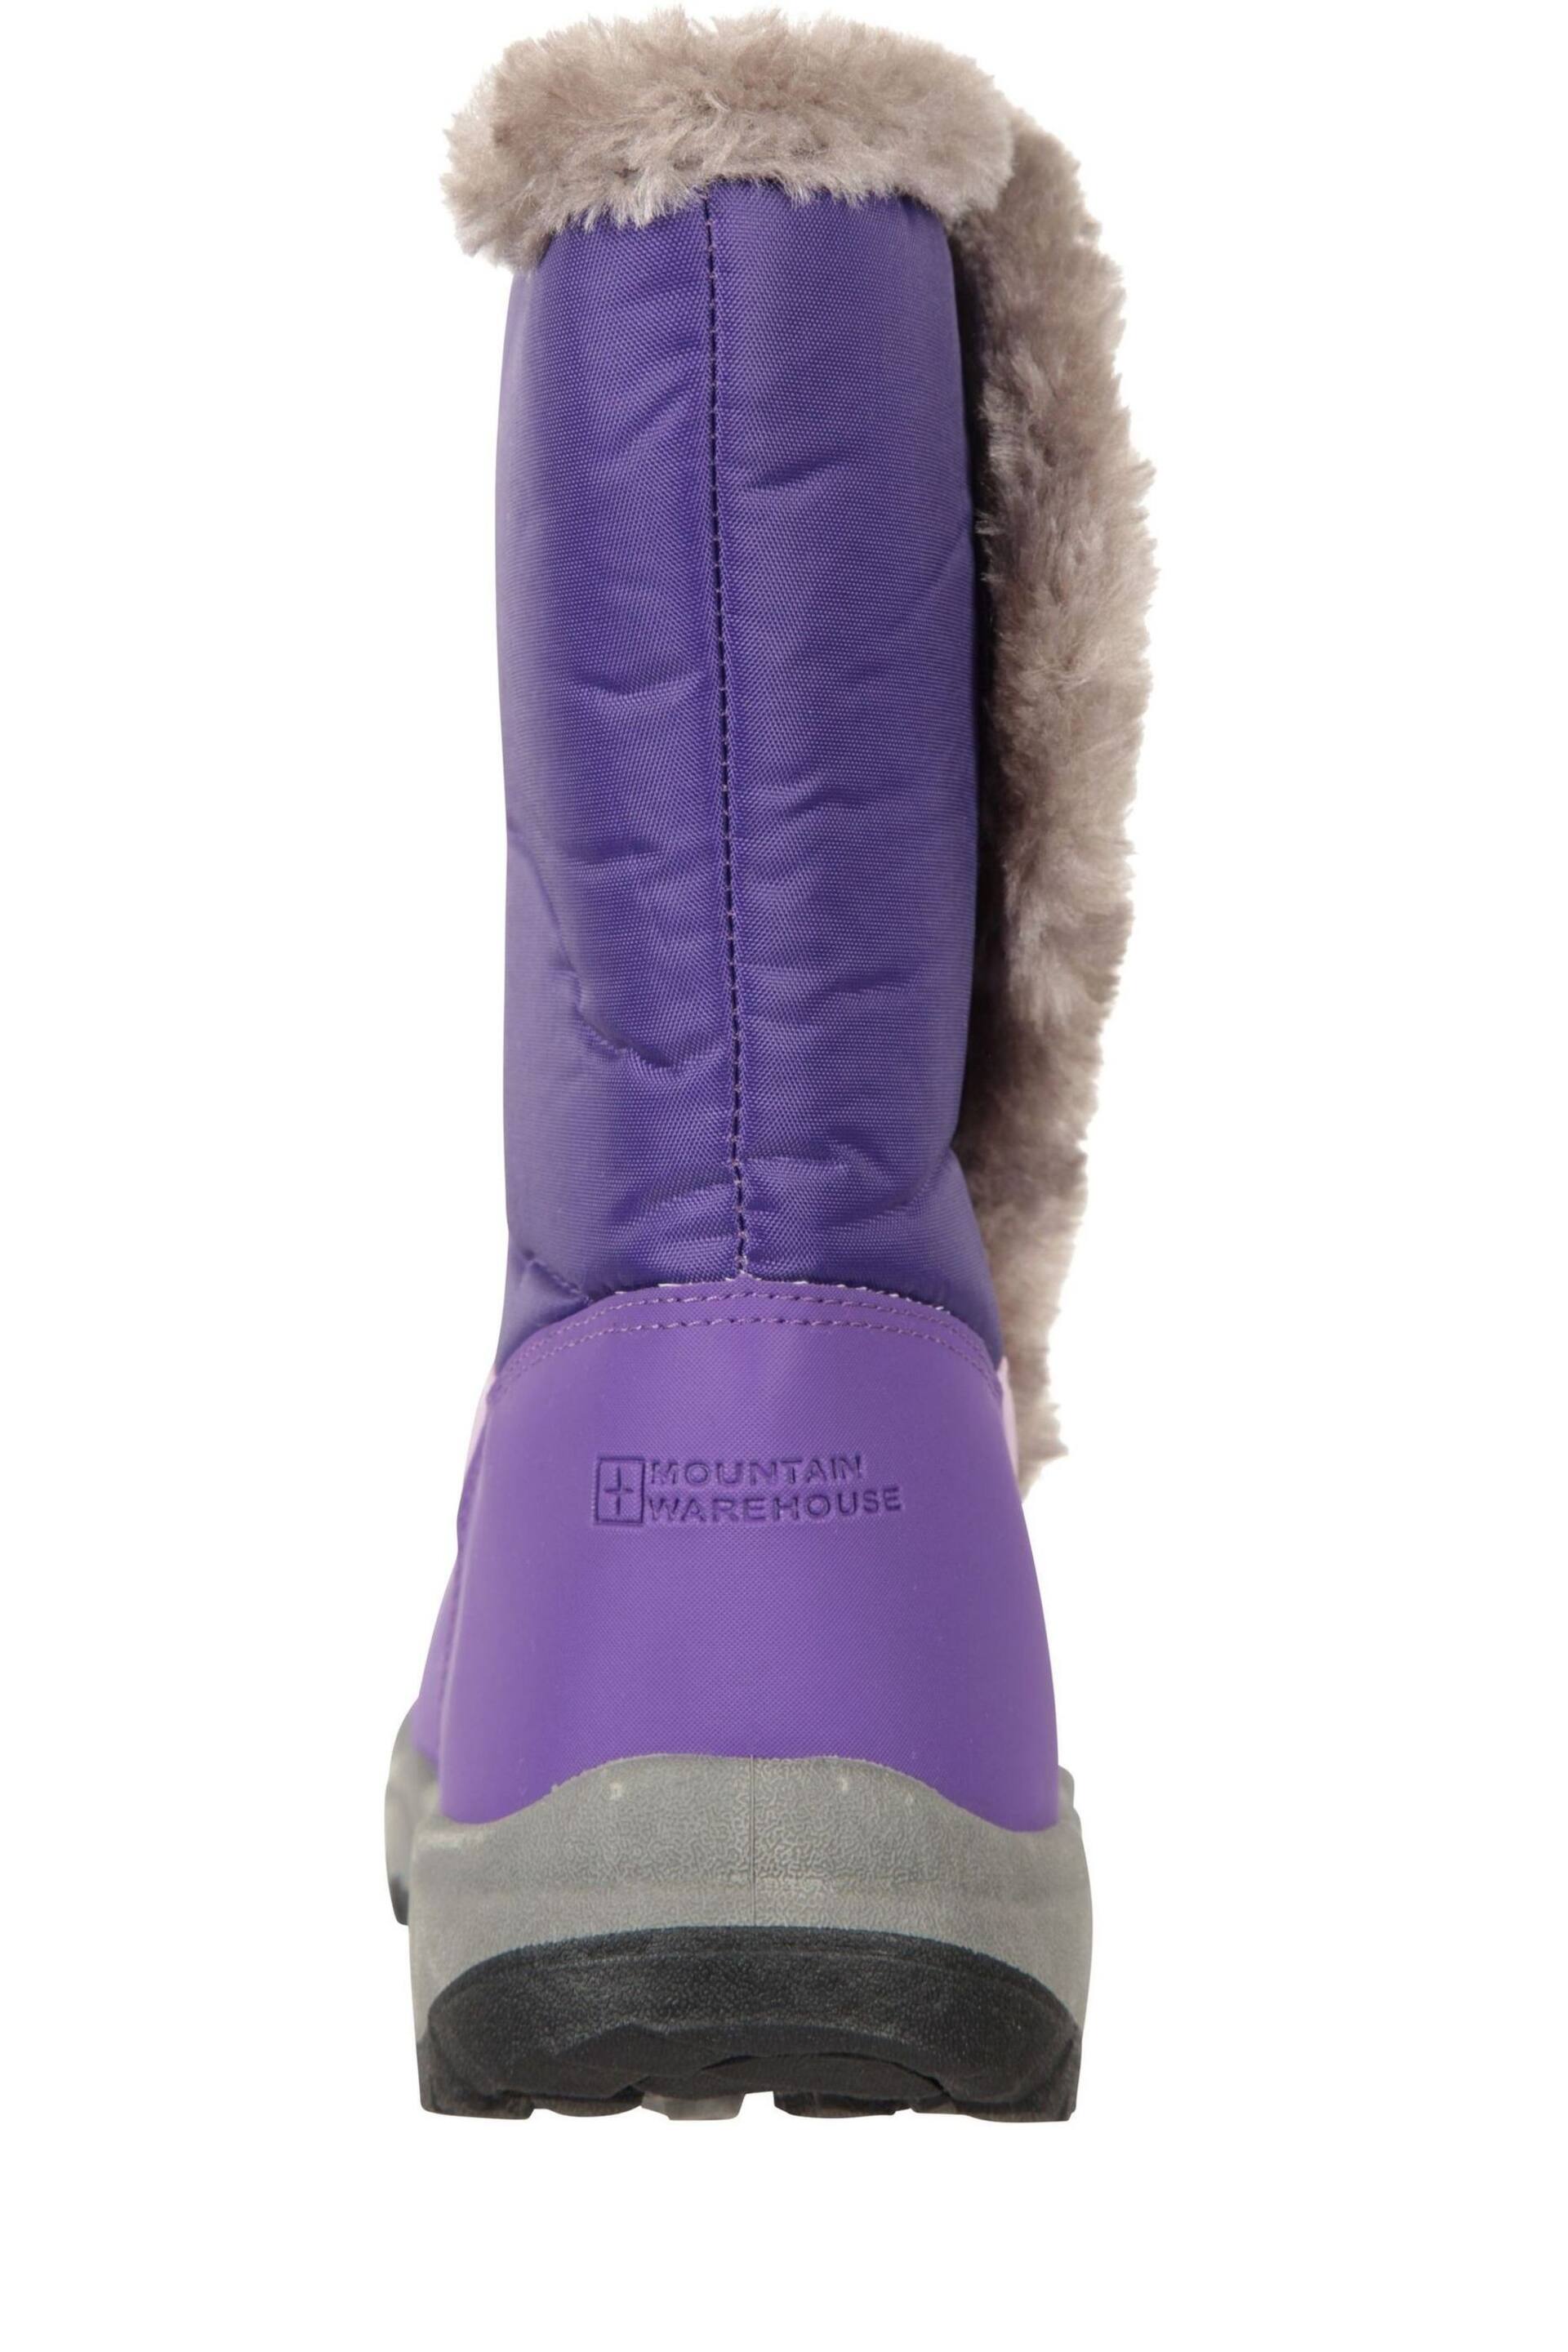 Mountain Warehouse Purple Caribou Kids Faux Fur Trim Sherpa Lined Snow Boots - Image 3 of 6